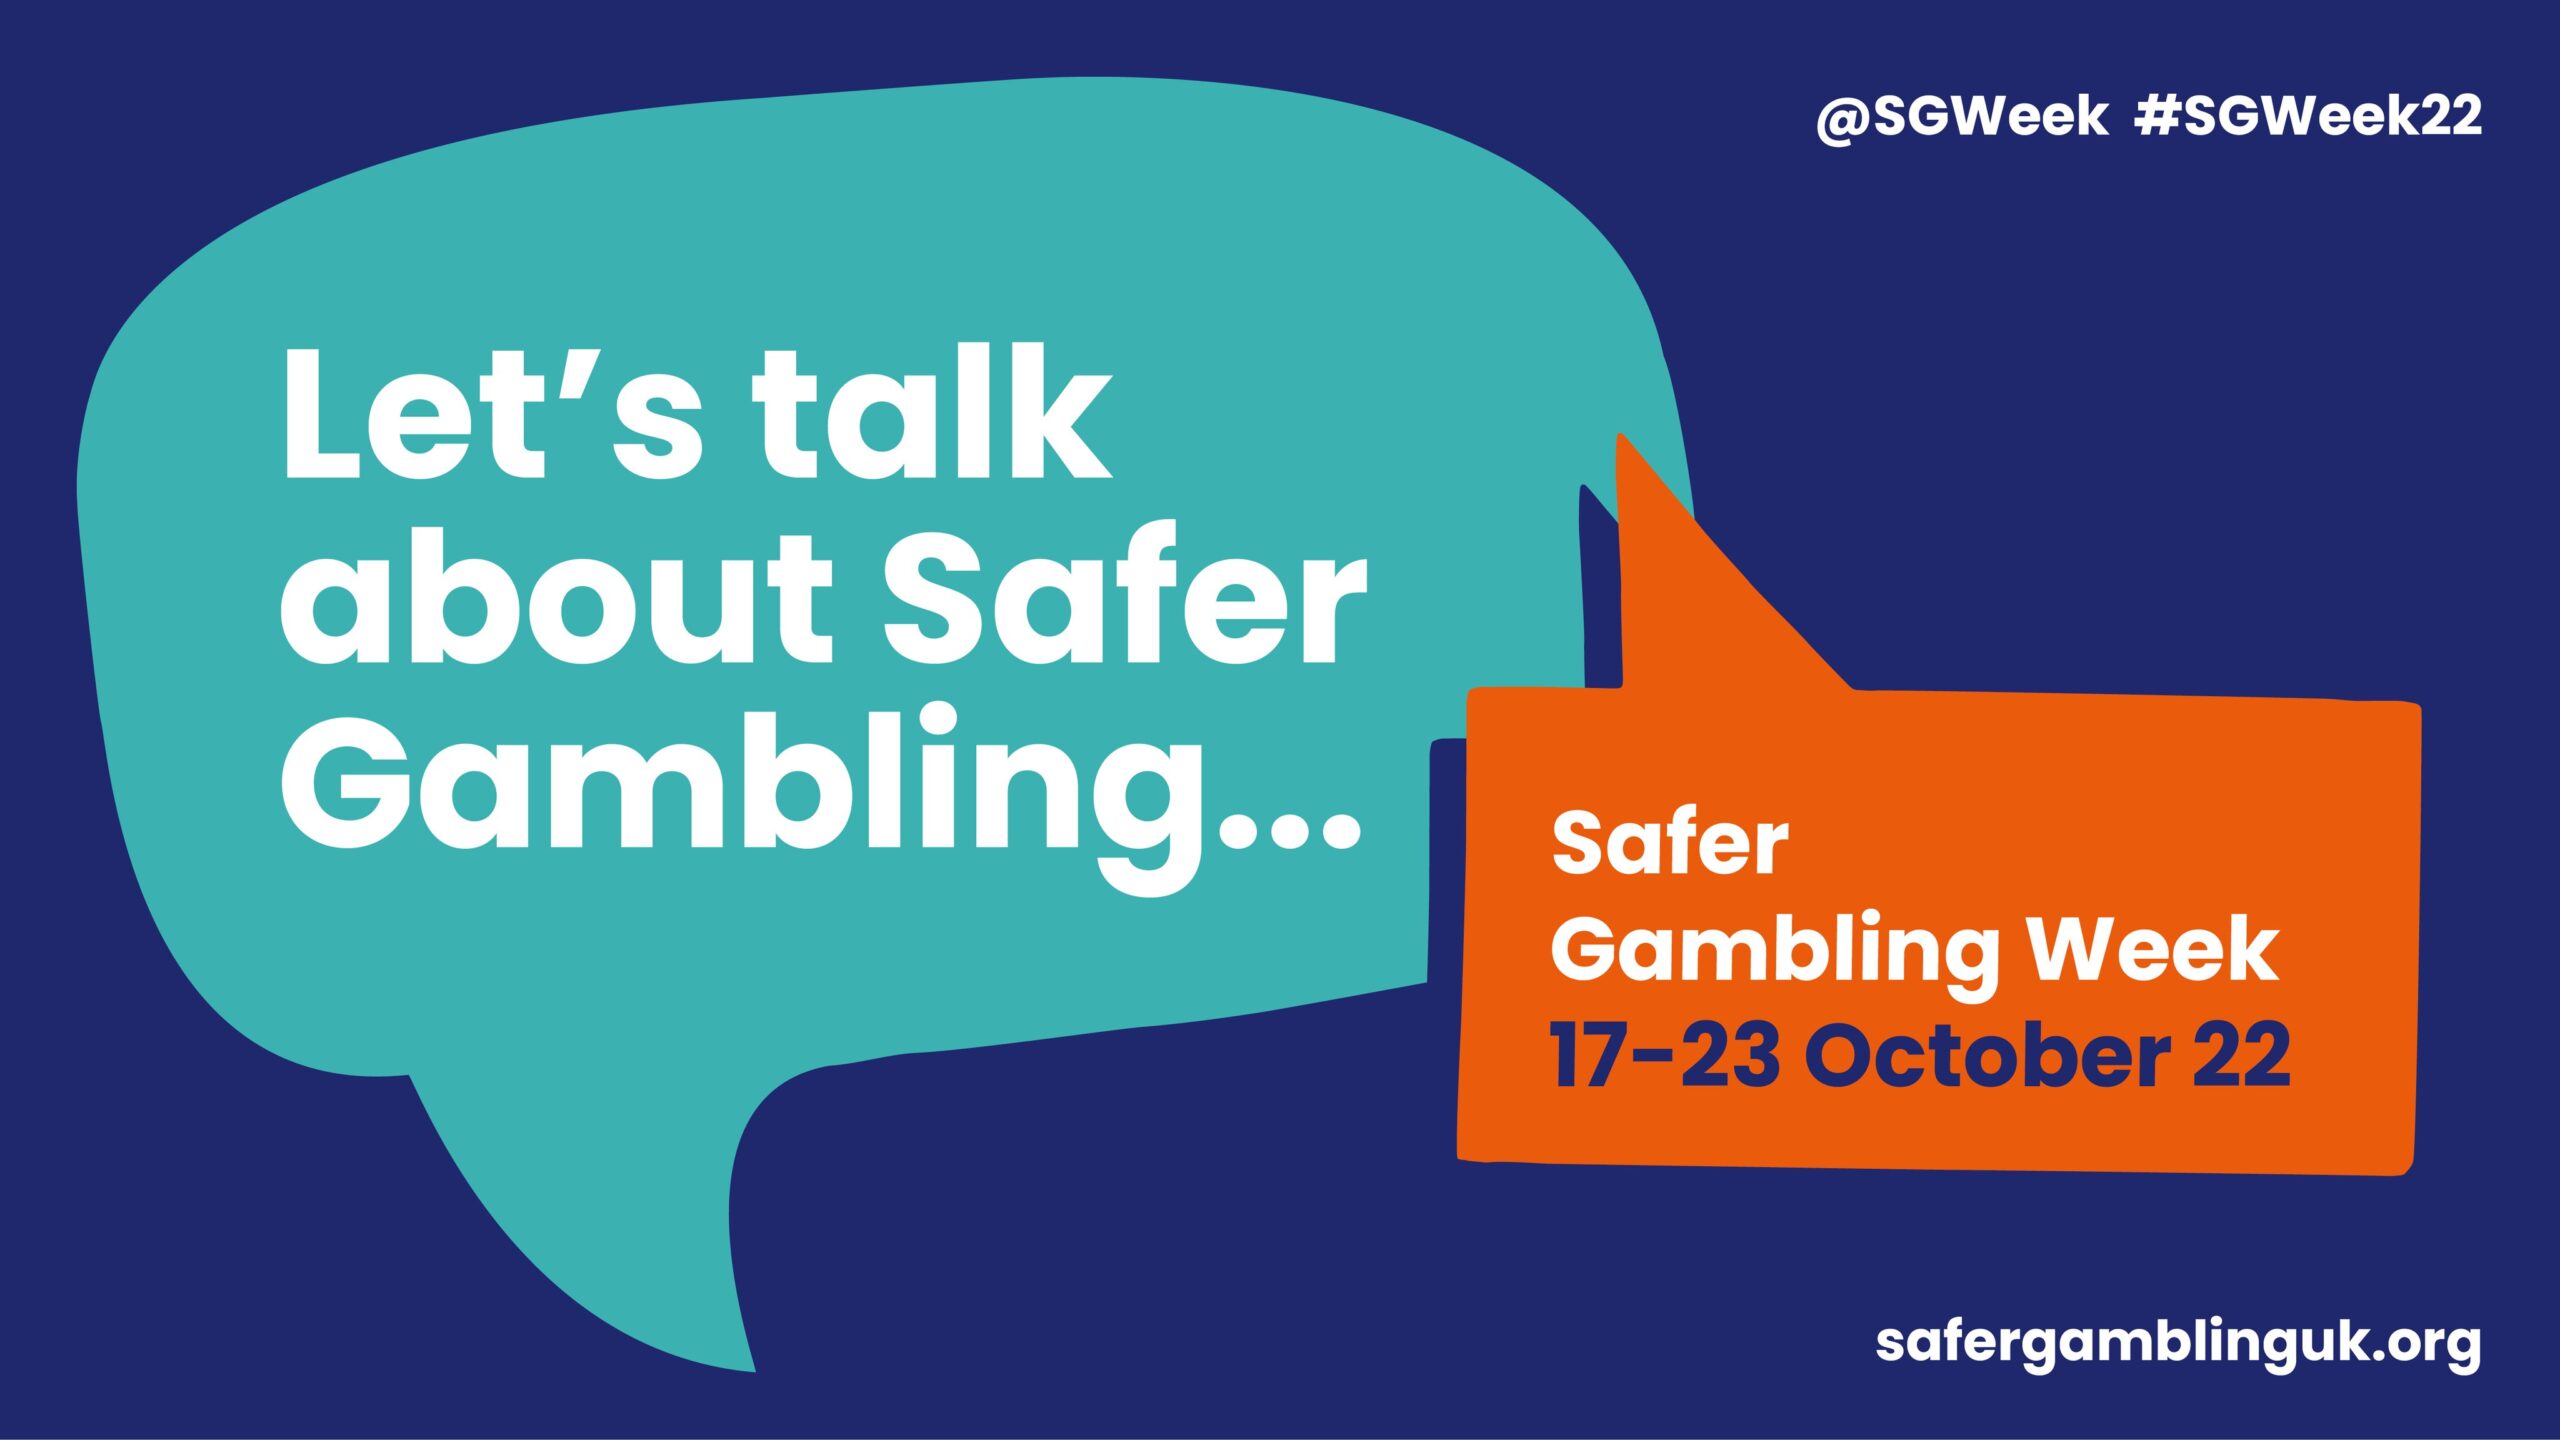 Norsk Bransjeforening for Onlinespill - European Safer Gambling Week From  17. - 23. October 2022, the European Safer Gambling Week, an initiative of  the European Gaming and Betting Association (EGBA), focuses on